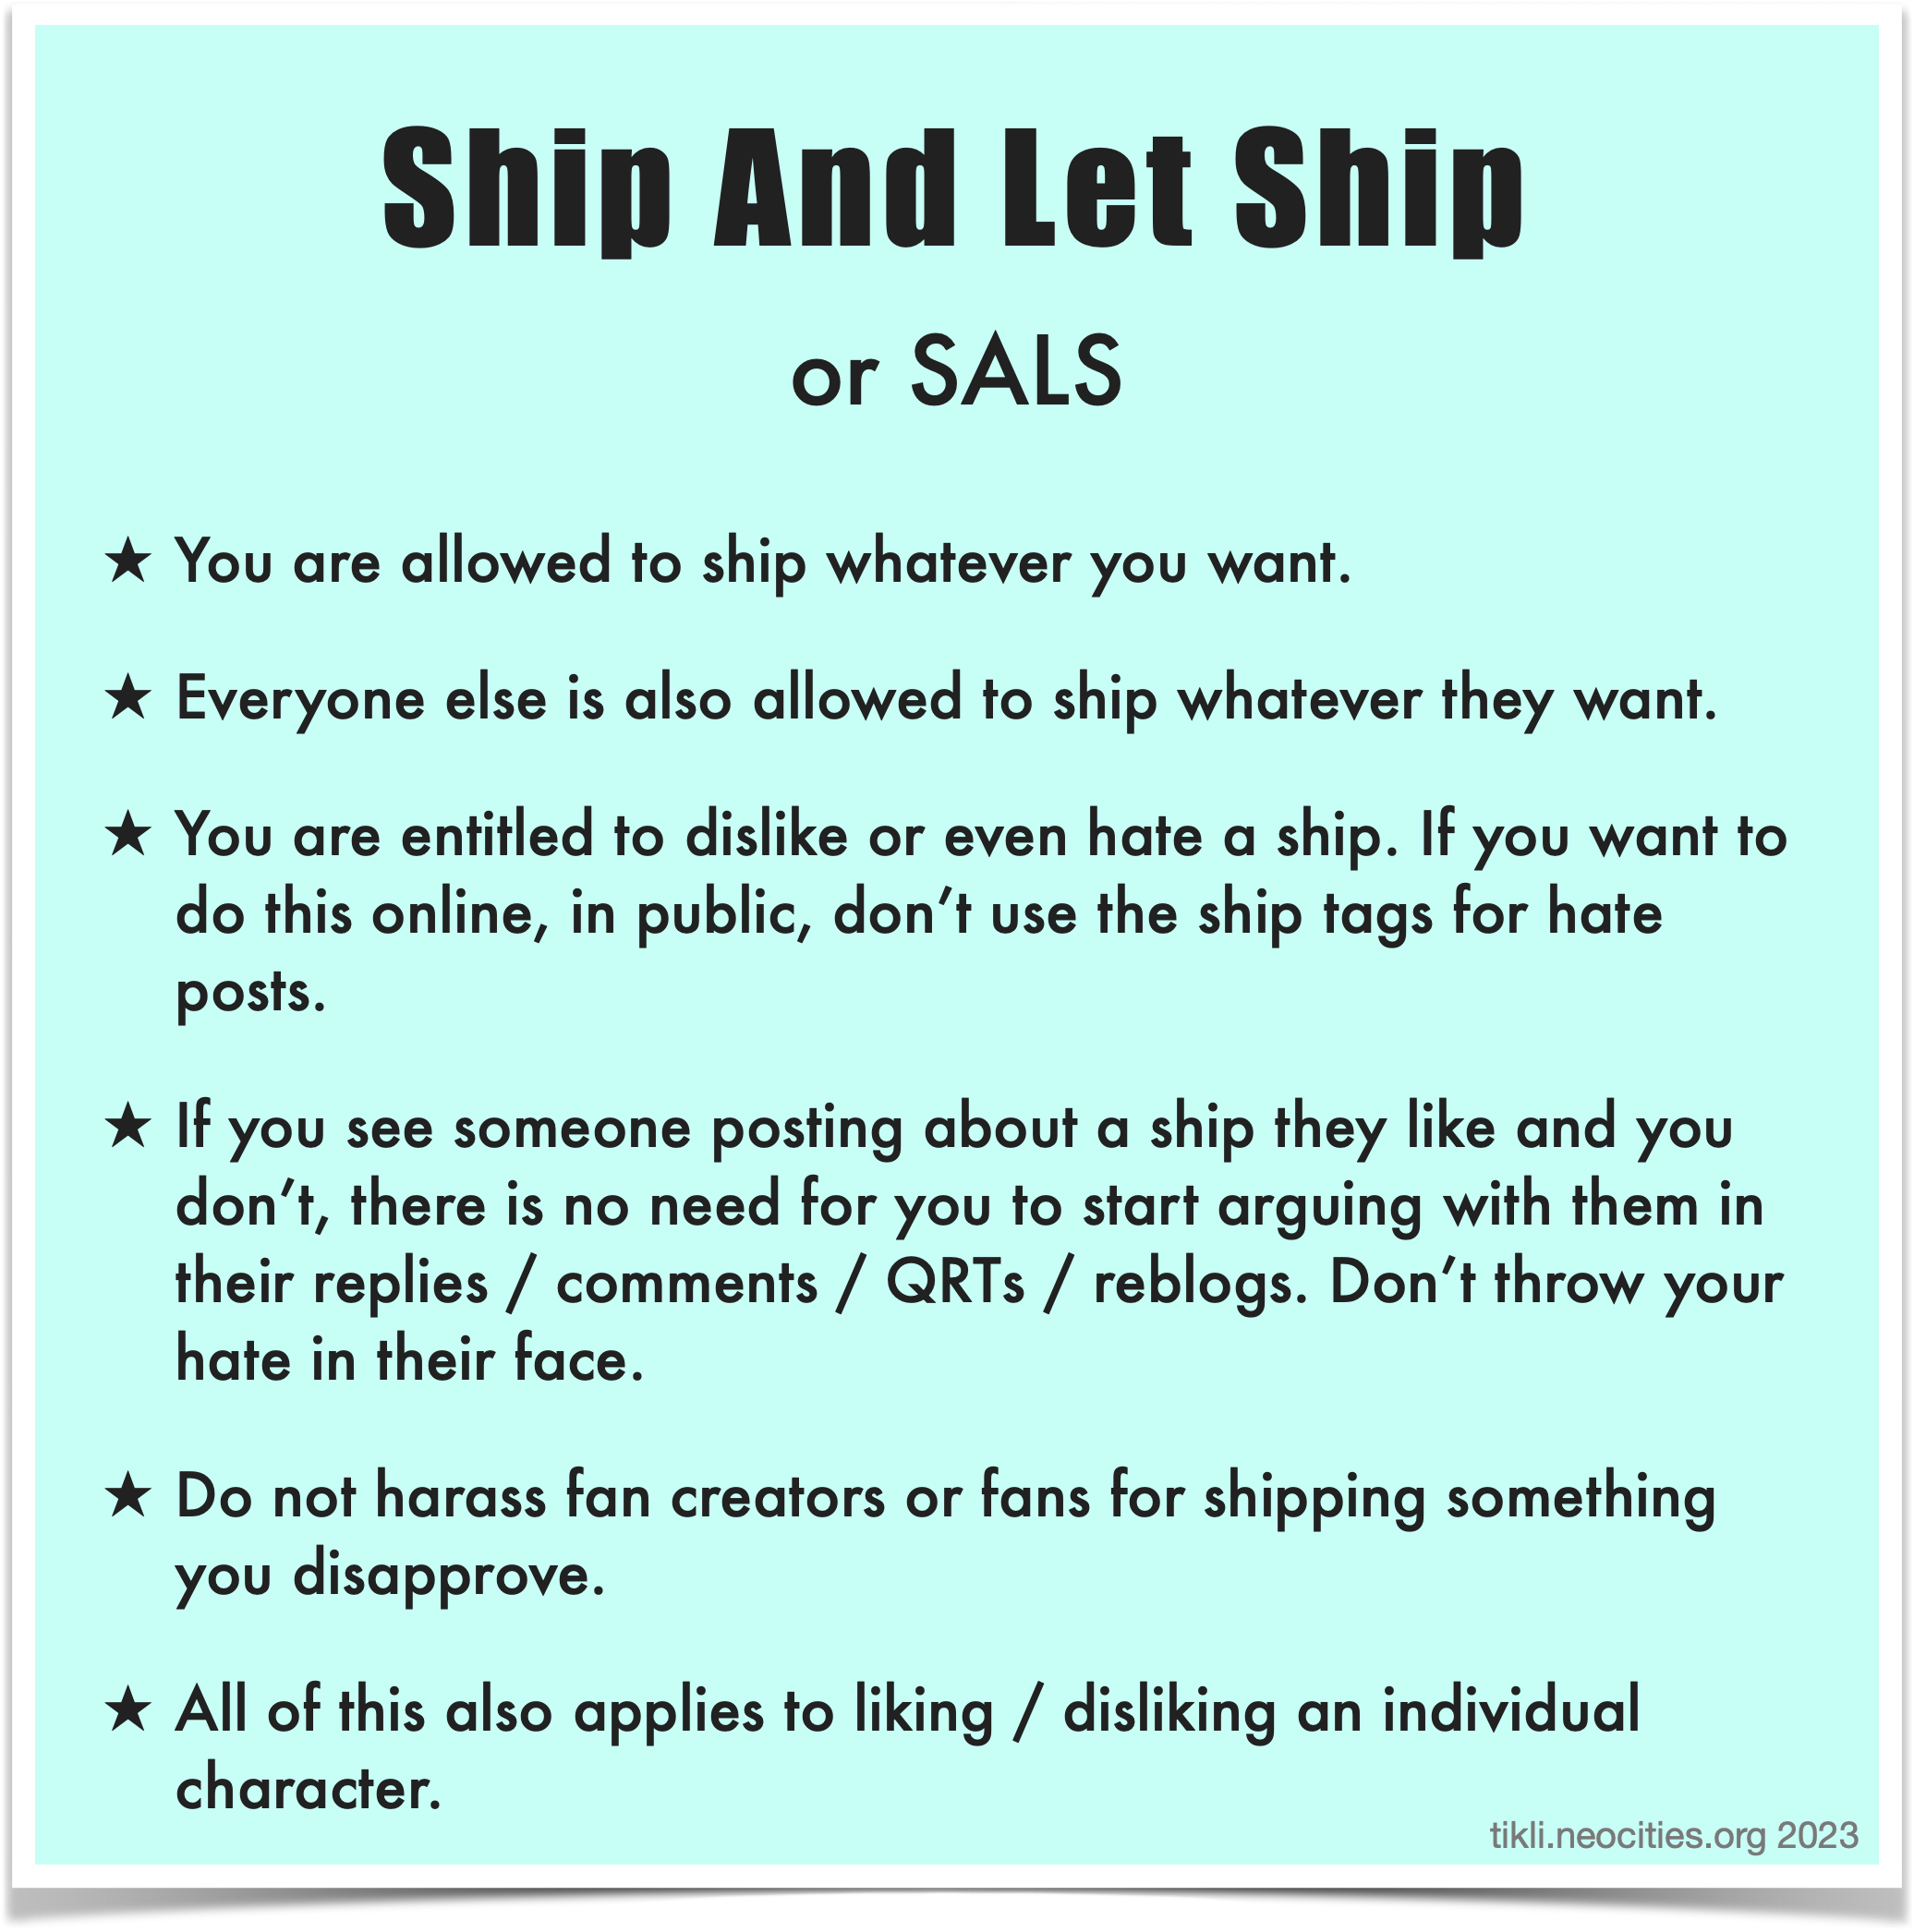 An infographic that looks like a bright turquoise sticky note, containing the Ship And Let Ship bullet points that precede the image.